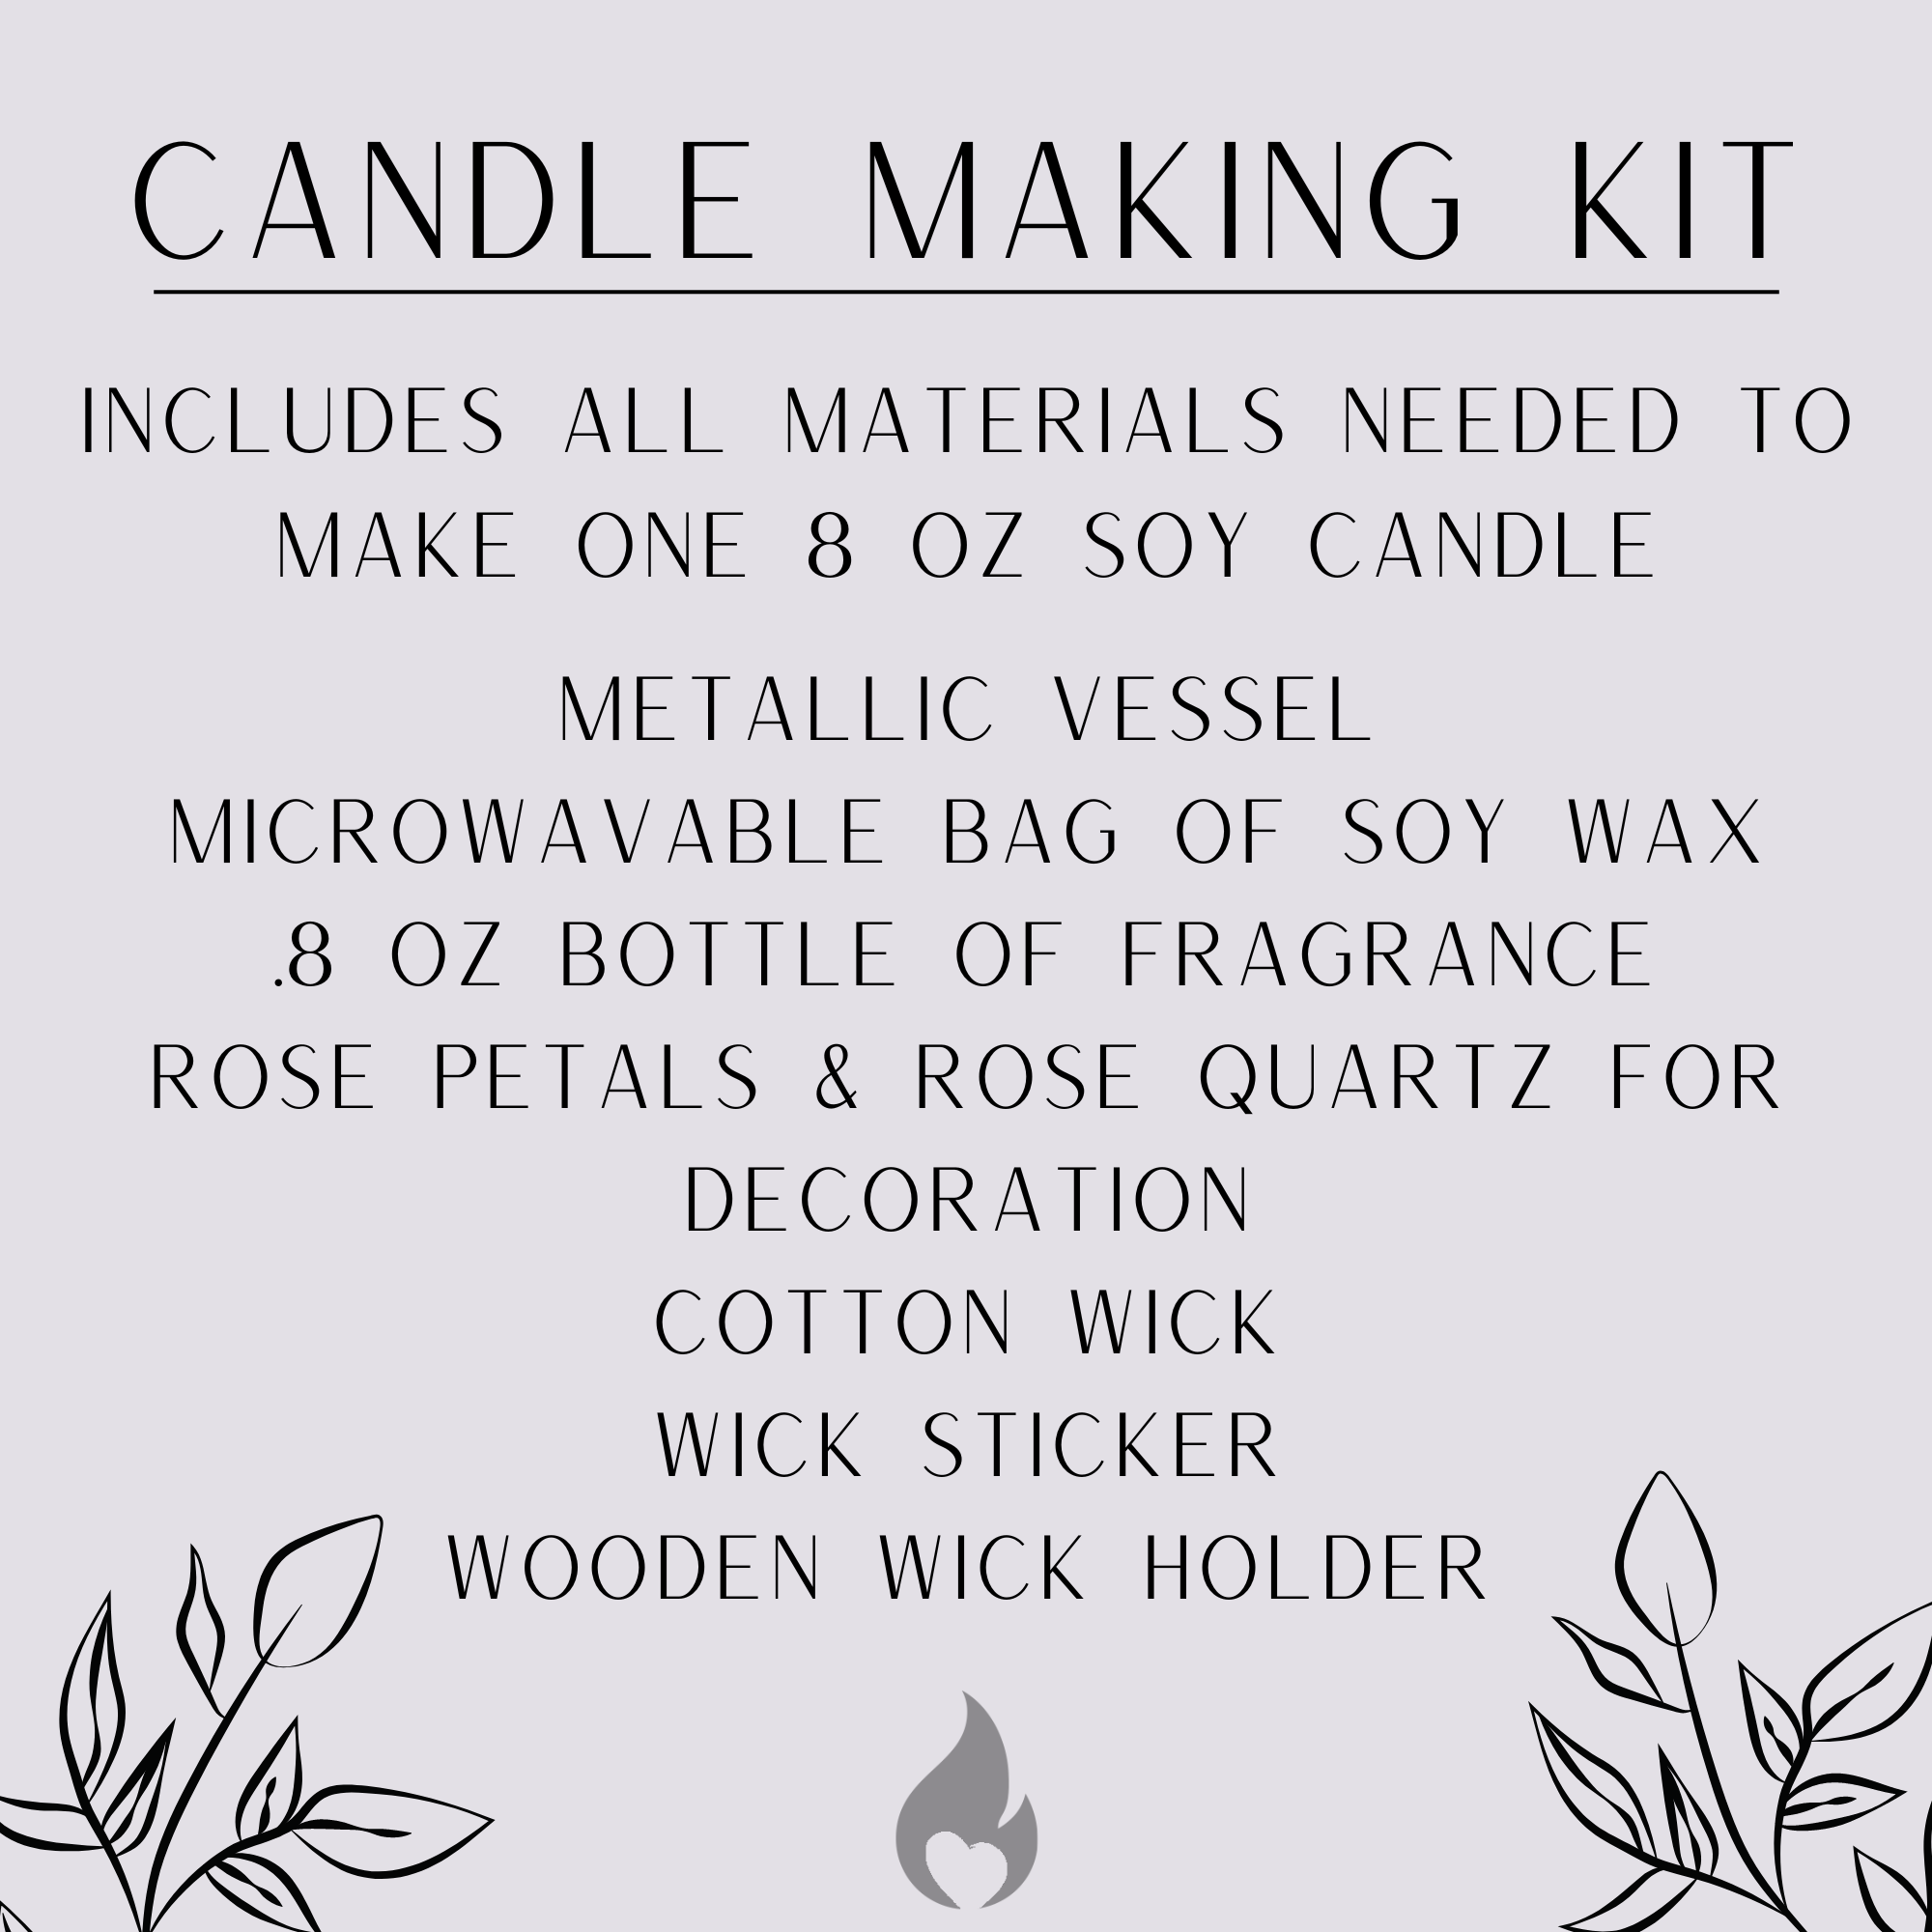 text graphic says candle making kit includes all materials needed to make one 8 oz soy candle metallic vessel microwavable bag of soy wax .8oz bottle of fragrance rose petals and rose quartz for decoration, cotton wick, wick sticker, wooden wick holder two outlines of leaves on the bottom